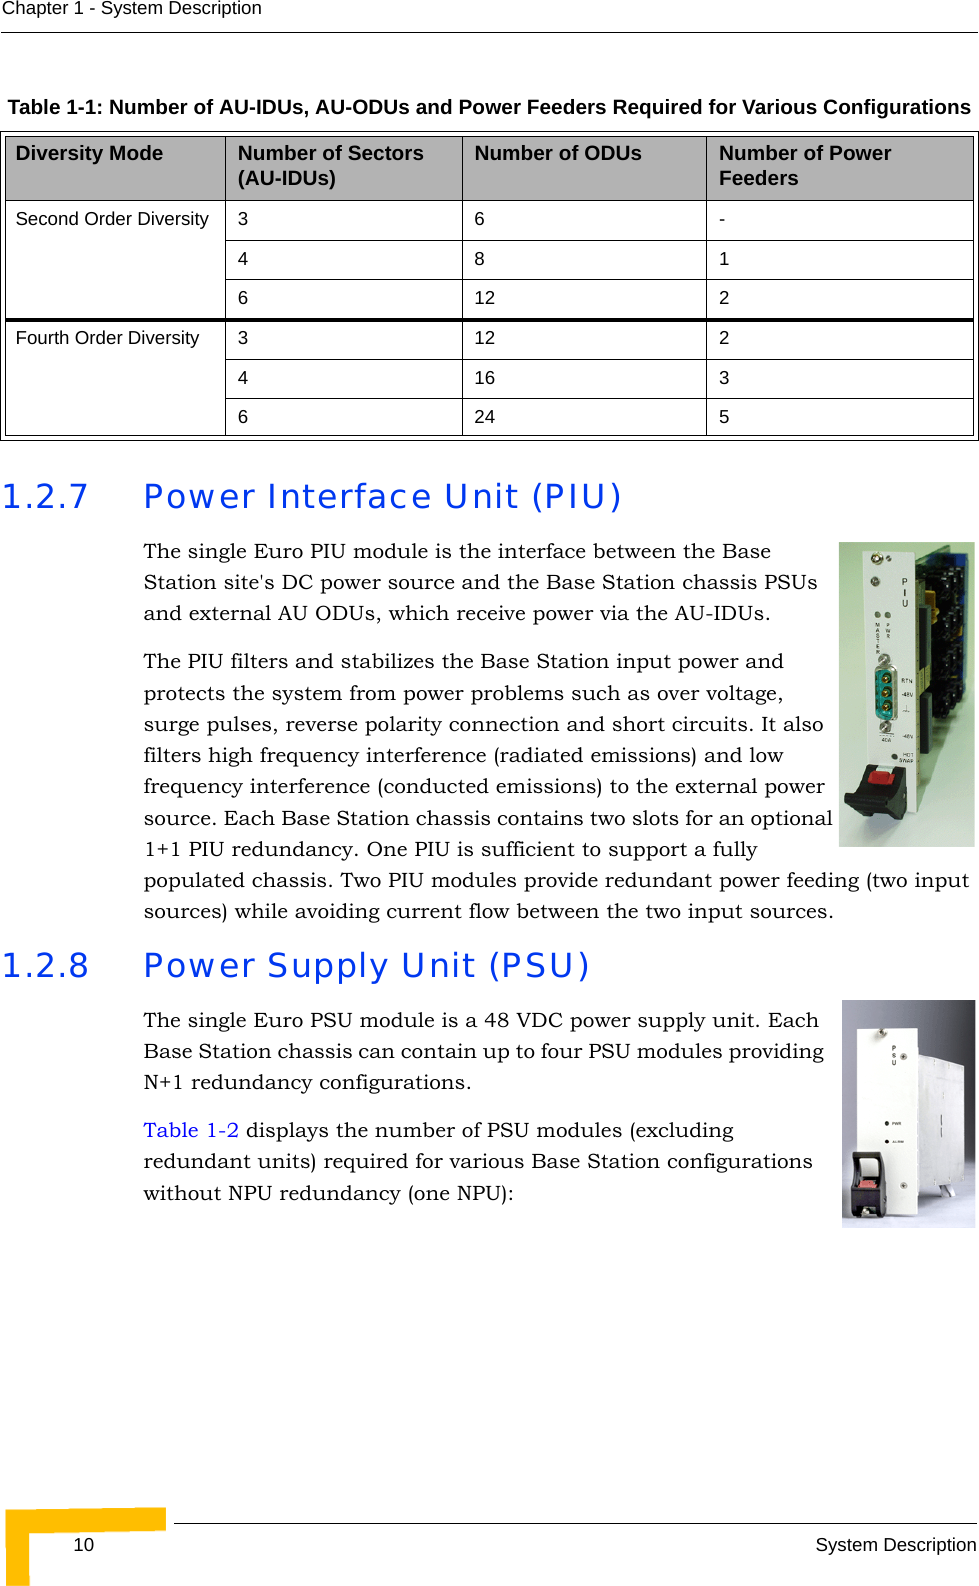 10 System DescriptionChapter 1 - System Description1.2.7 Power Interface Unit (PIU)The single Euro PIU module is the interface between the Base Station site&apos;s DC power source and the Base Station chassis PSUs and external AU ODUs, which receive power via the AU-IDUs. The PIU filters and stabilizes the Base Station input power and protects the system from power problems such as over voltage, surge pulses, reverse polarity connection and short circuits. It also filters high frequency interference (radiated emissions) and low frequency interference (conducted emissions) to the external power source. Each Base Station chassis contains two slots for an optional 1+1 PIU redundancy. One PIU is sufficient to support a fully populated chassis. Two PIU modules provide redundant power feeding (two input sources) while avoiding current flow between the two input sources.1.2.8 Power Supply Unit (PSU)The single Euro PSU module is a 48 VDC power supply unit. Each Base Station chassis can contain up to four PSU modules providing N+1 redundancy configurations.Table 1-2 displays the number of PSU modules (excluding redundant units) required for various Base Station configurations without NPU redundancy (one NPU):Table 1-1: Number of AU-IDUs, AU-ODUs and Power Feeders Required for Various ConfigurationsDiversity Mode Number of Sectors (AU-IDUs) Number of ODUs Number of Power FeedersSecond Order Diversity 3 6 -48 16122Fourth Order Diversity 3 12 241636245